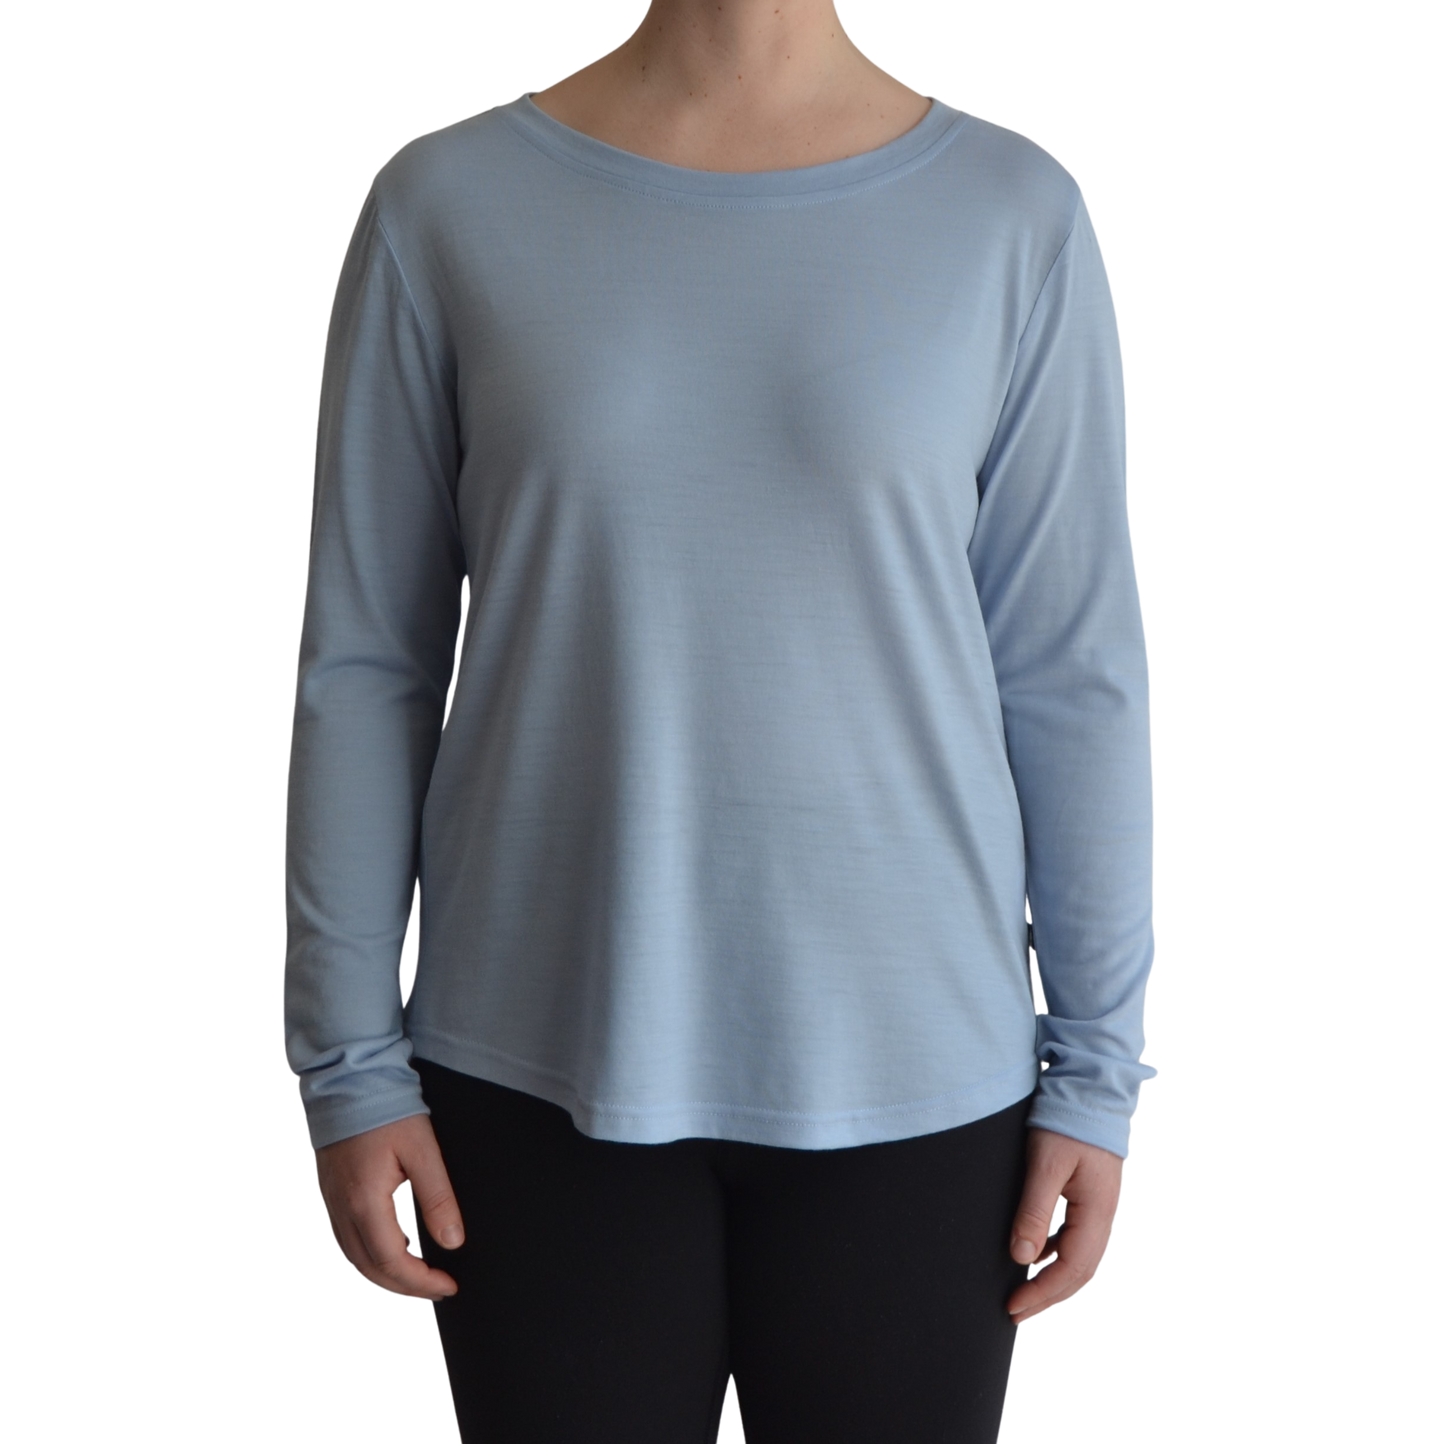 Links long sleeve merino top in ice blue colour, model faces forward showing the front of the top with scooped neck and hemline.. 